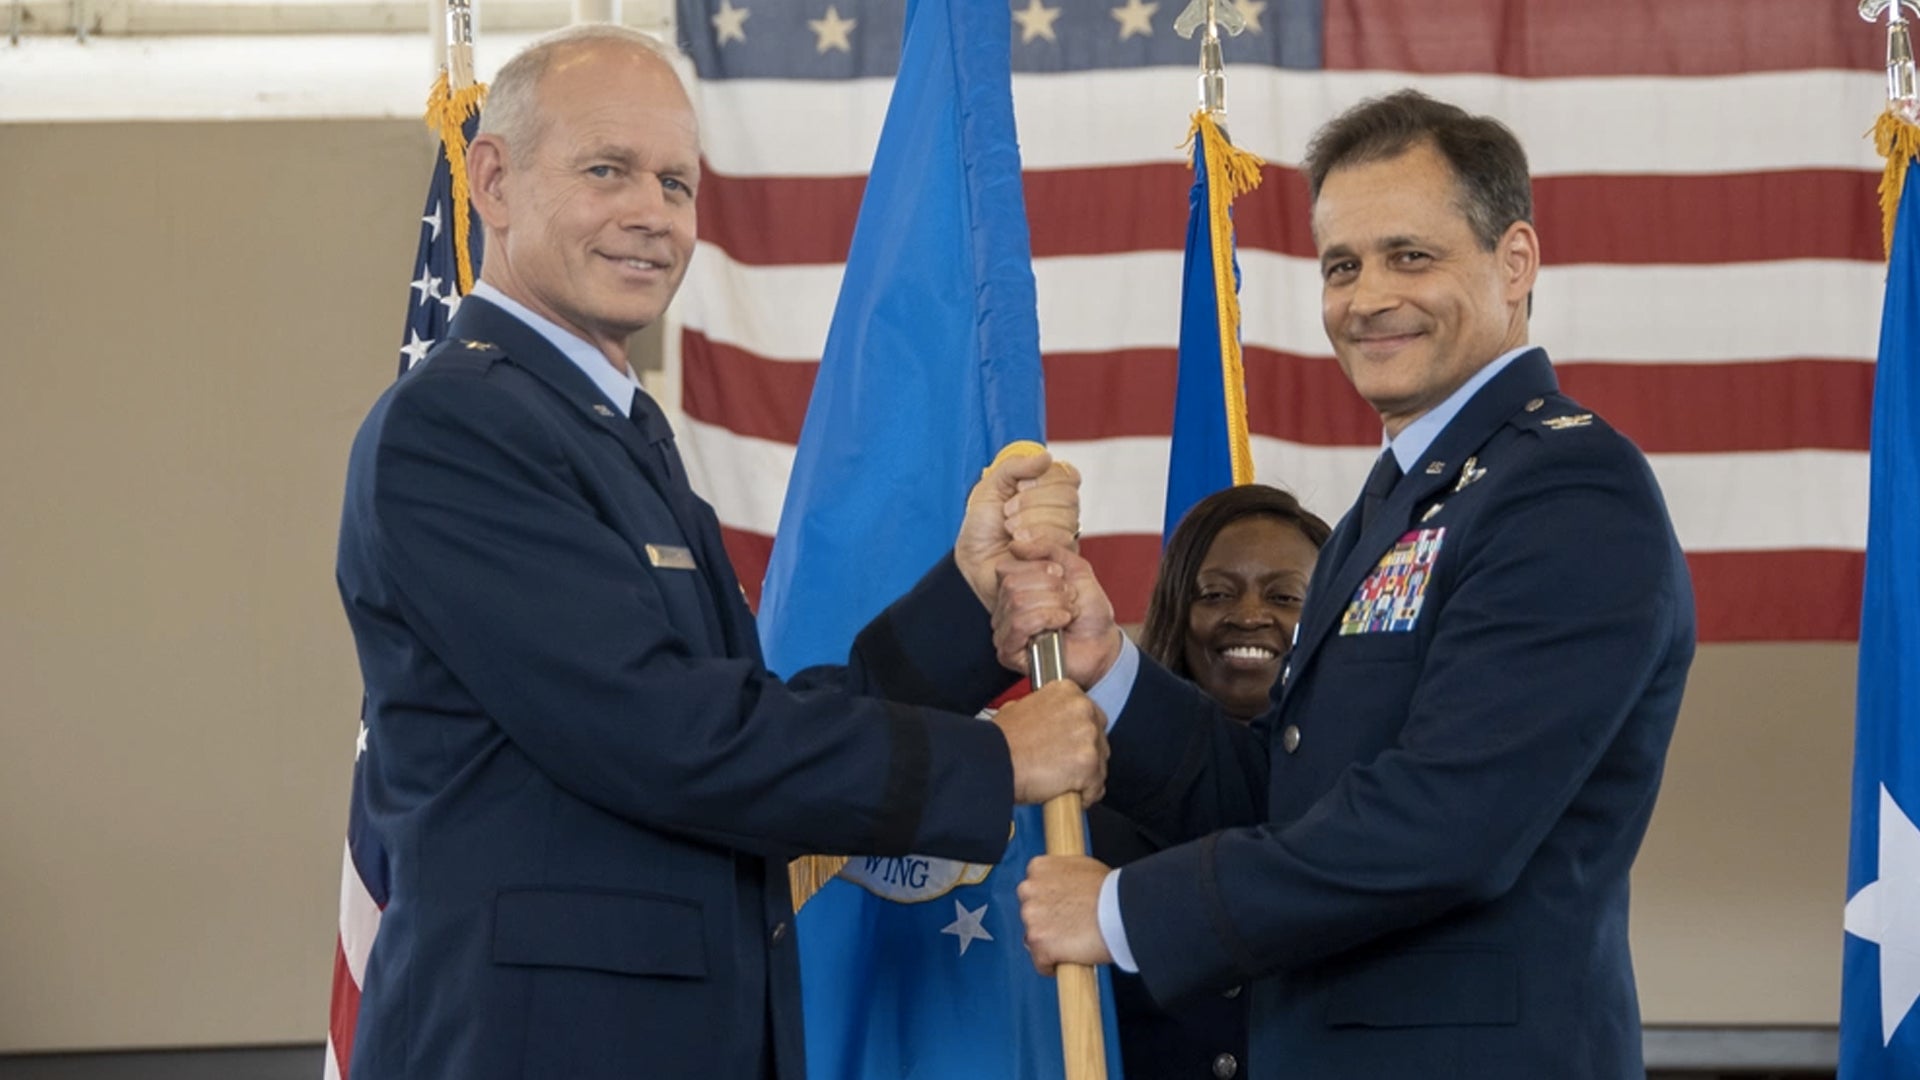 Col. Douglas D. DeMaio assumes command of the 187th Fighter Wing May 5, 2021, at a change of command ceremony held in the hangar at Dannelly Field, Ala. Brig. Gen. William L. Sparrow, Alabama Air National Guard commander, presided over the ceremony. (Jim Bentley/U.S. Air National Guard)